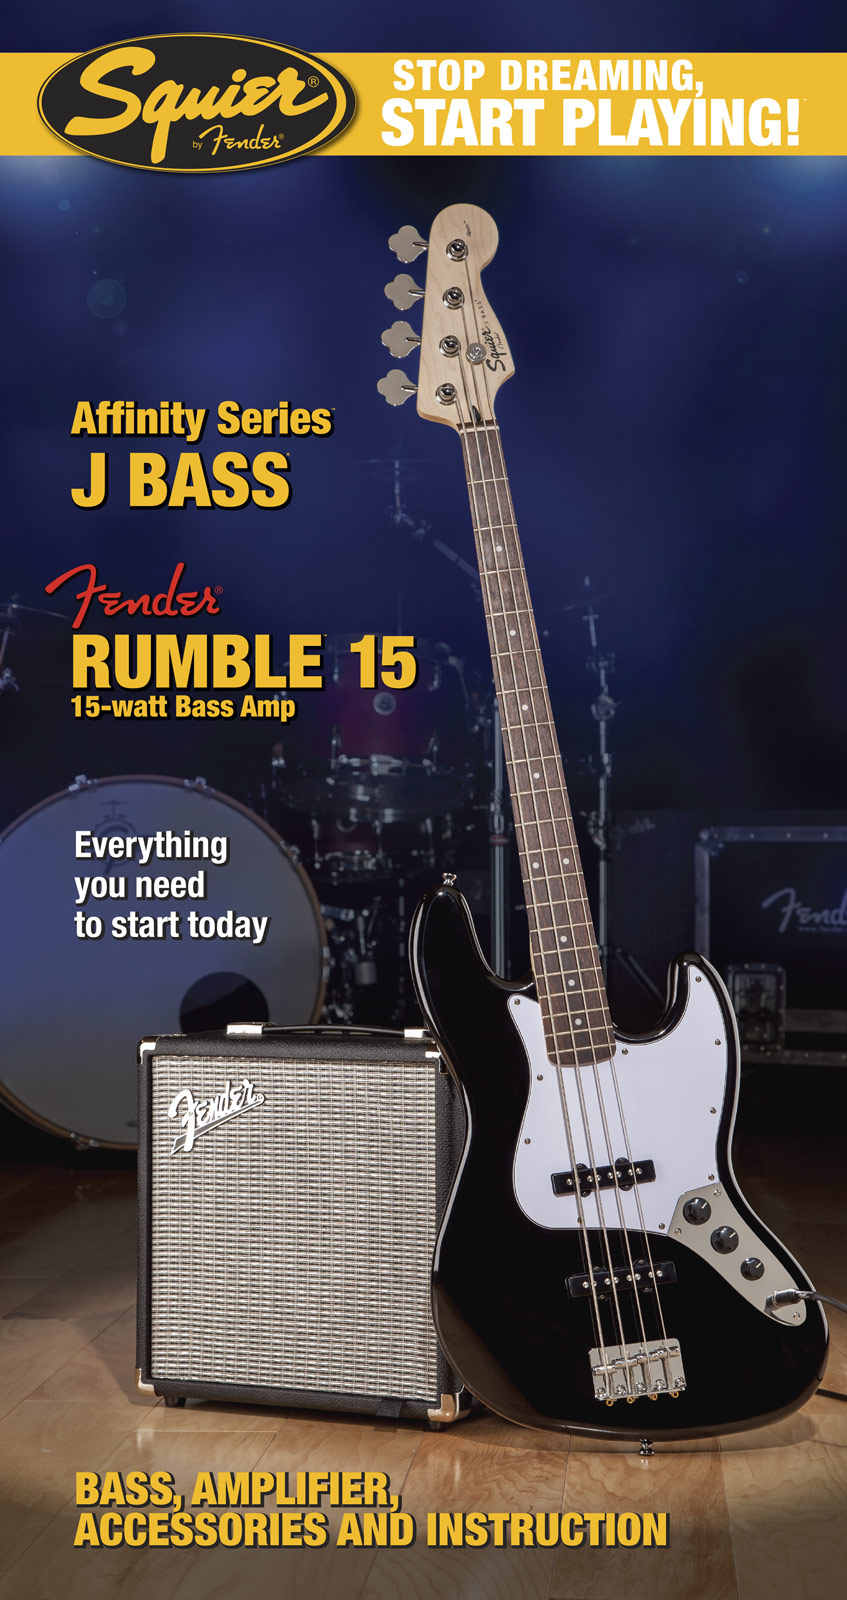 Squier Jazz Bass Affinity With Fender Rumble 15 Set - Black - Electric bass set - Variation 1